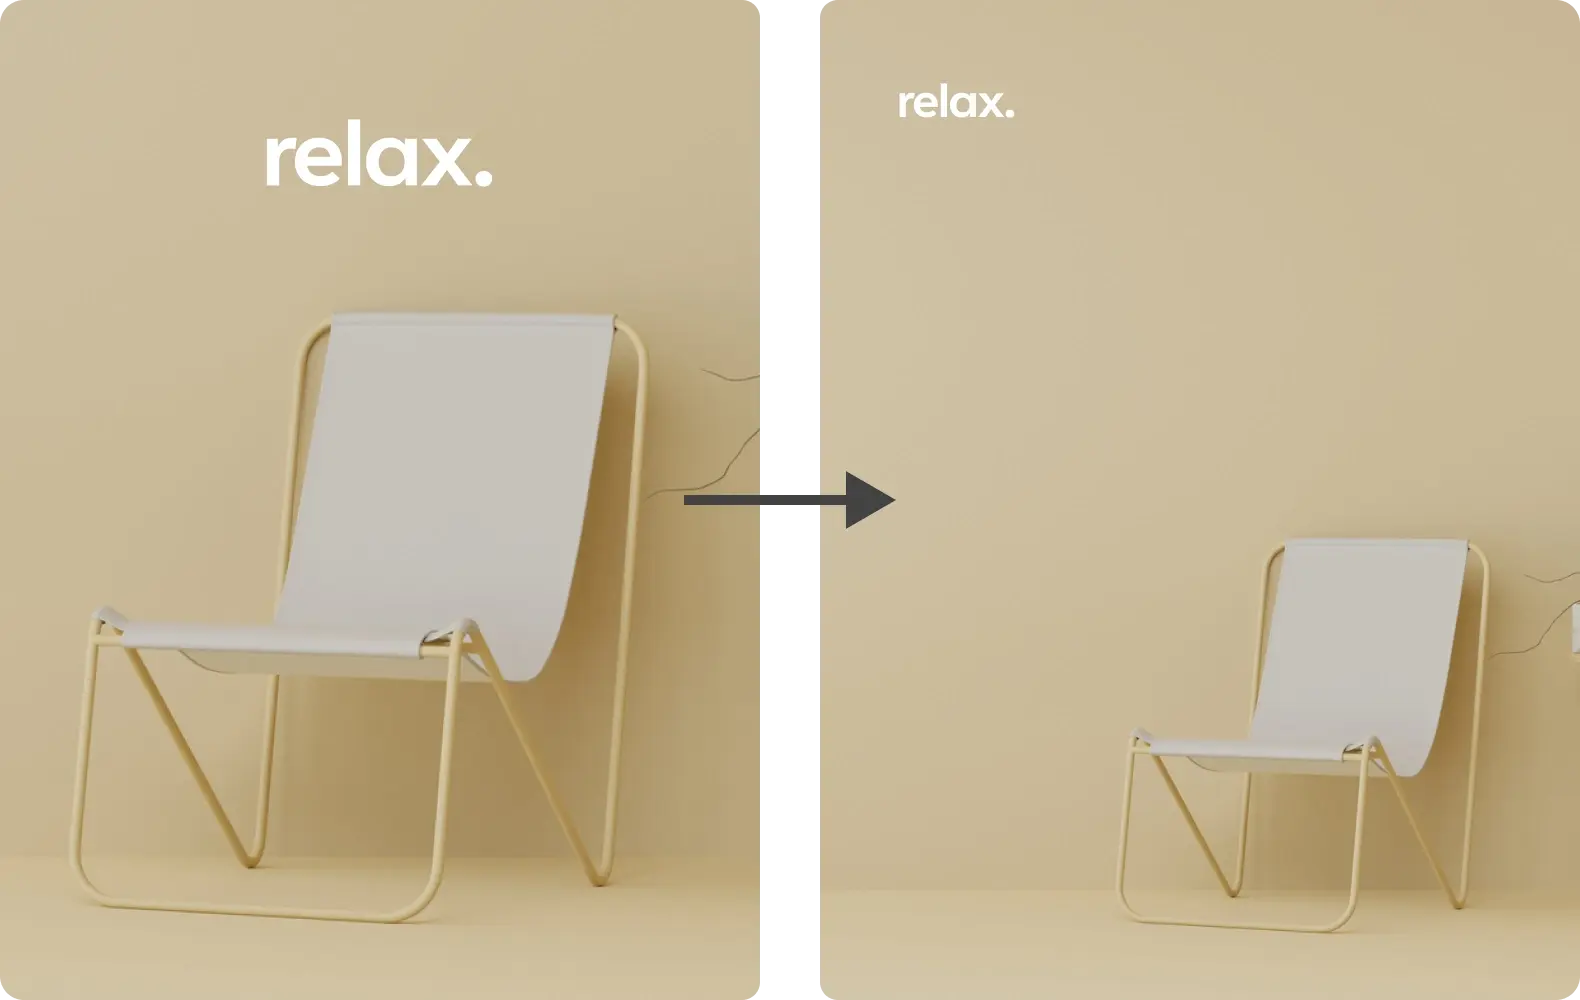 Side-by-side images of a chair in an image with the word "relax." The left image does not have much negative space. The right image has a lot of negative space around the chair.